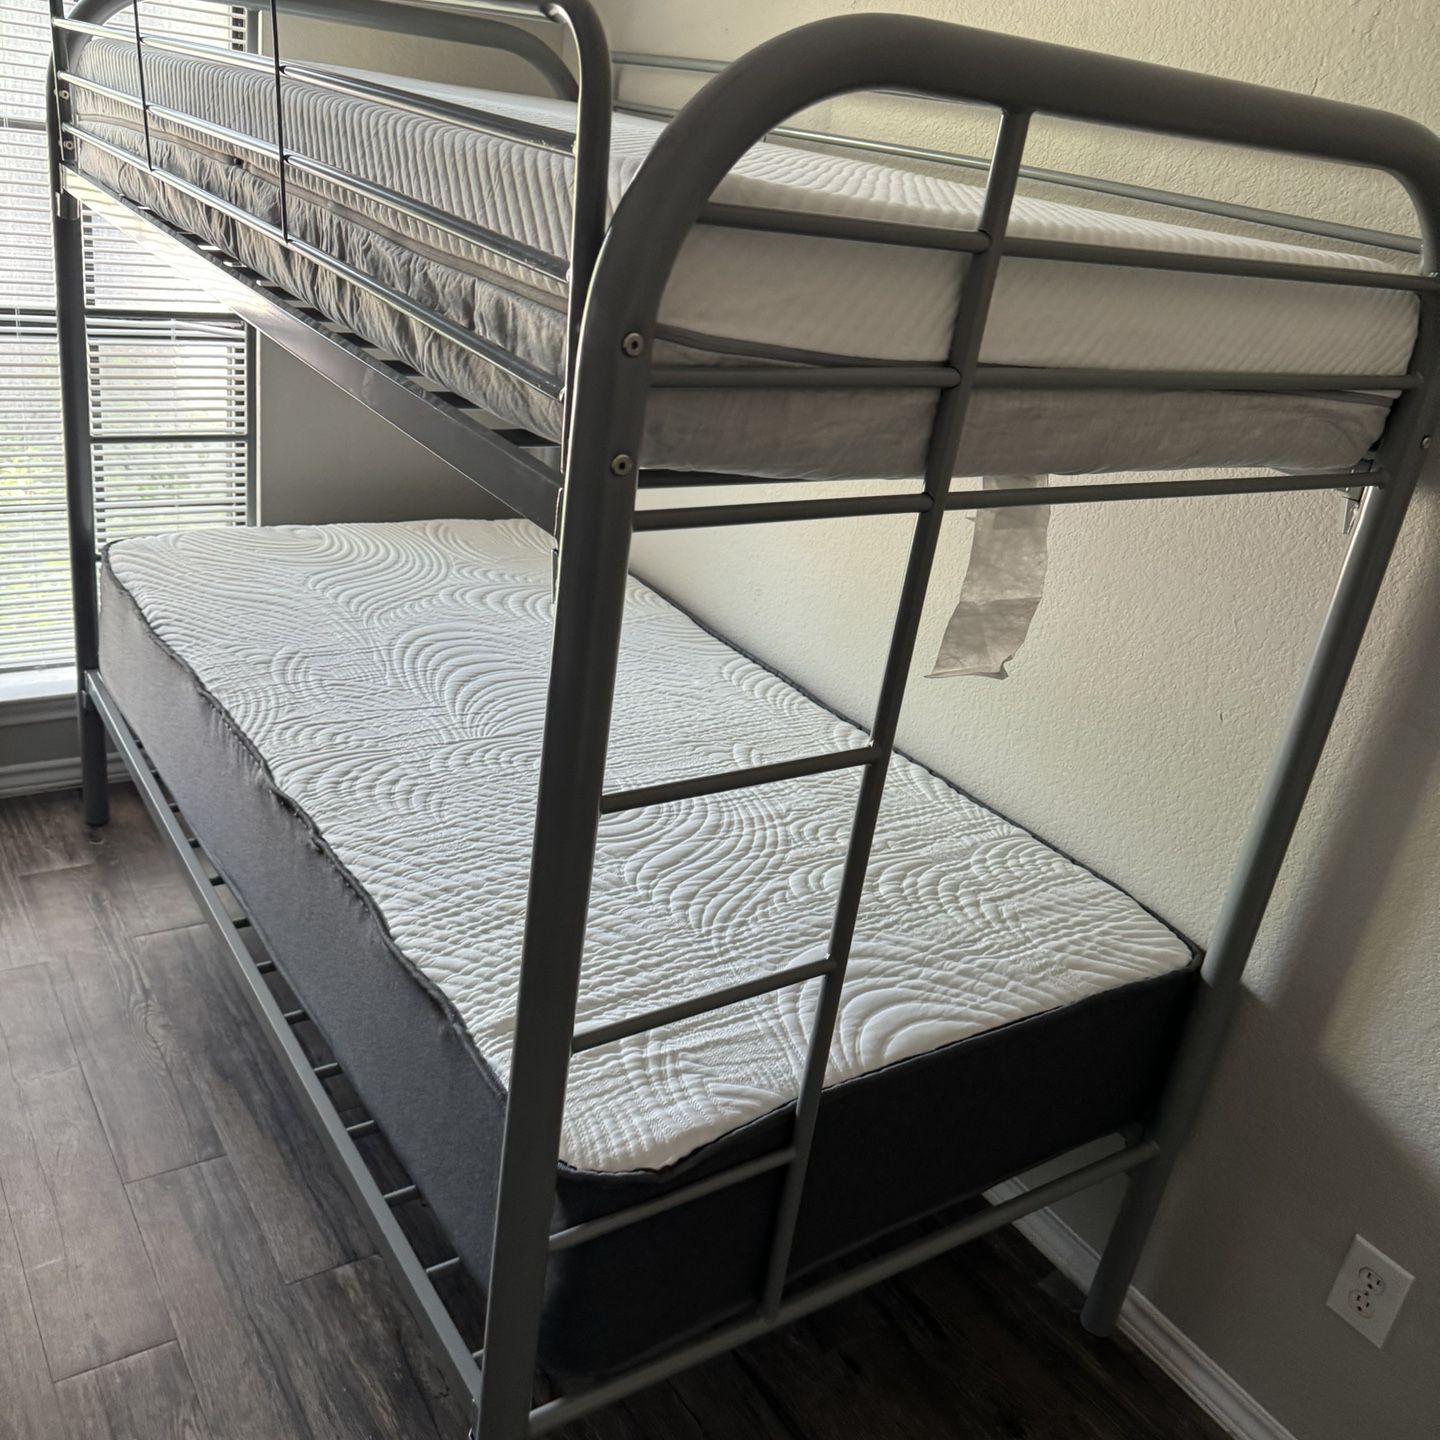 New Bunk Bed For $449